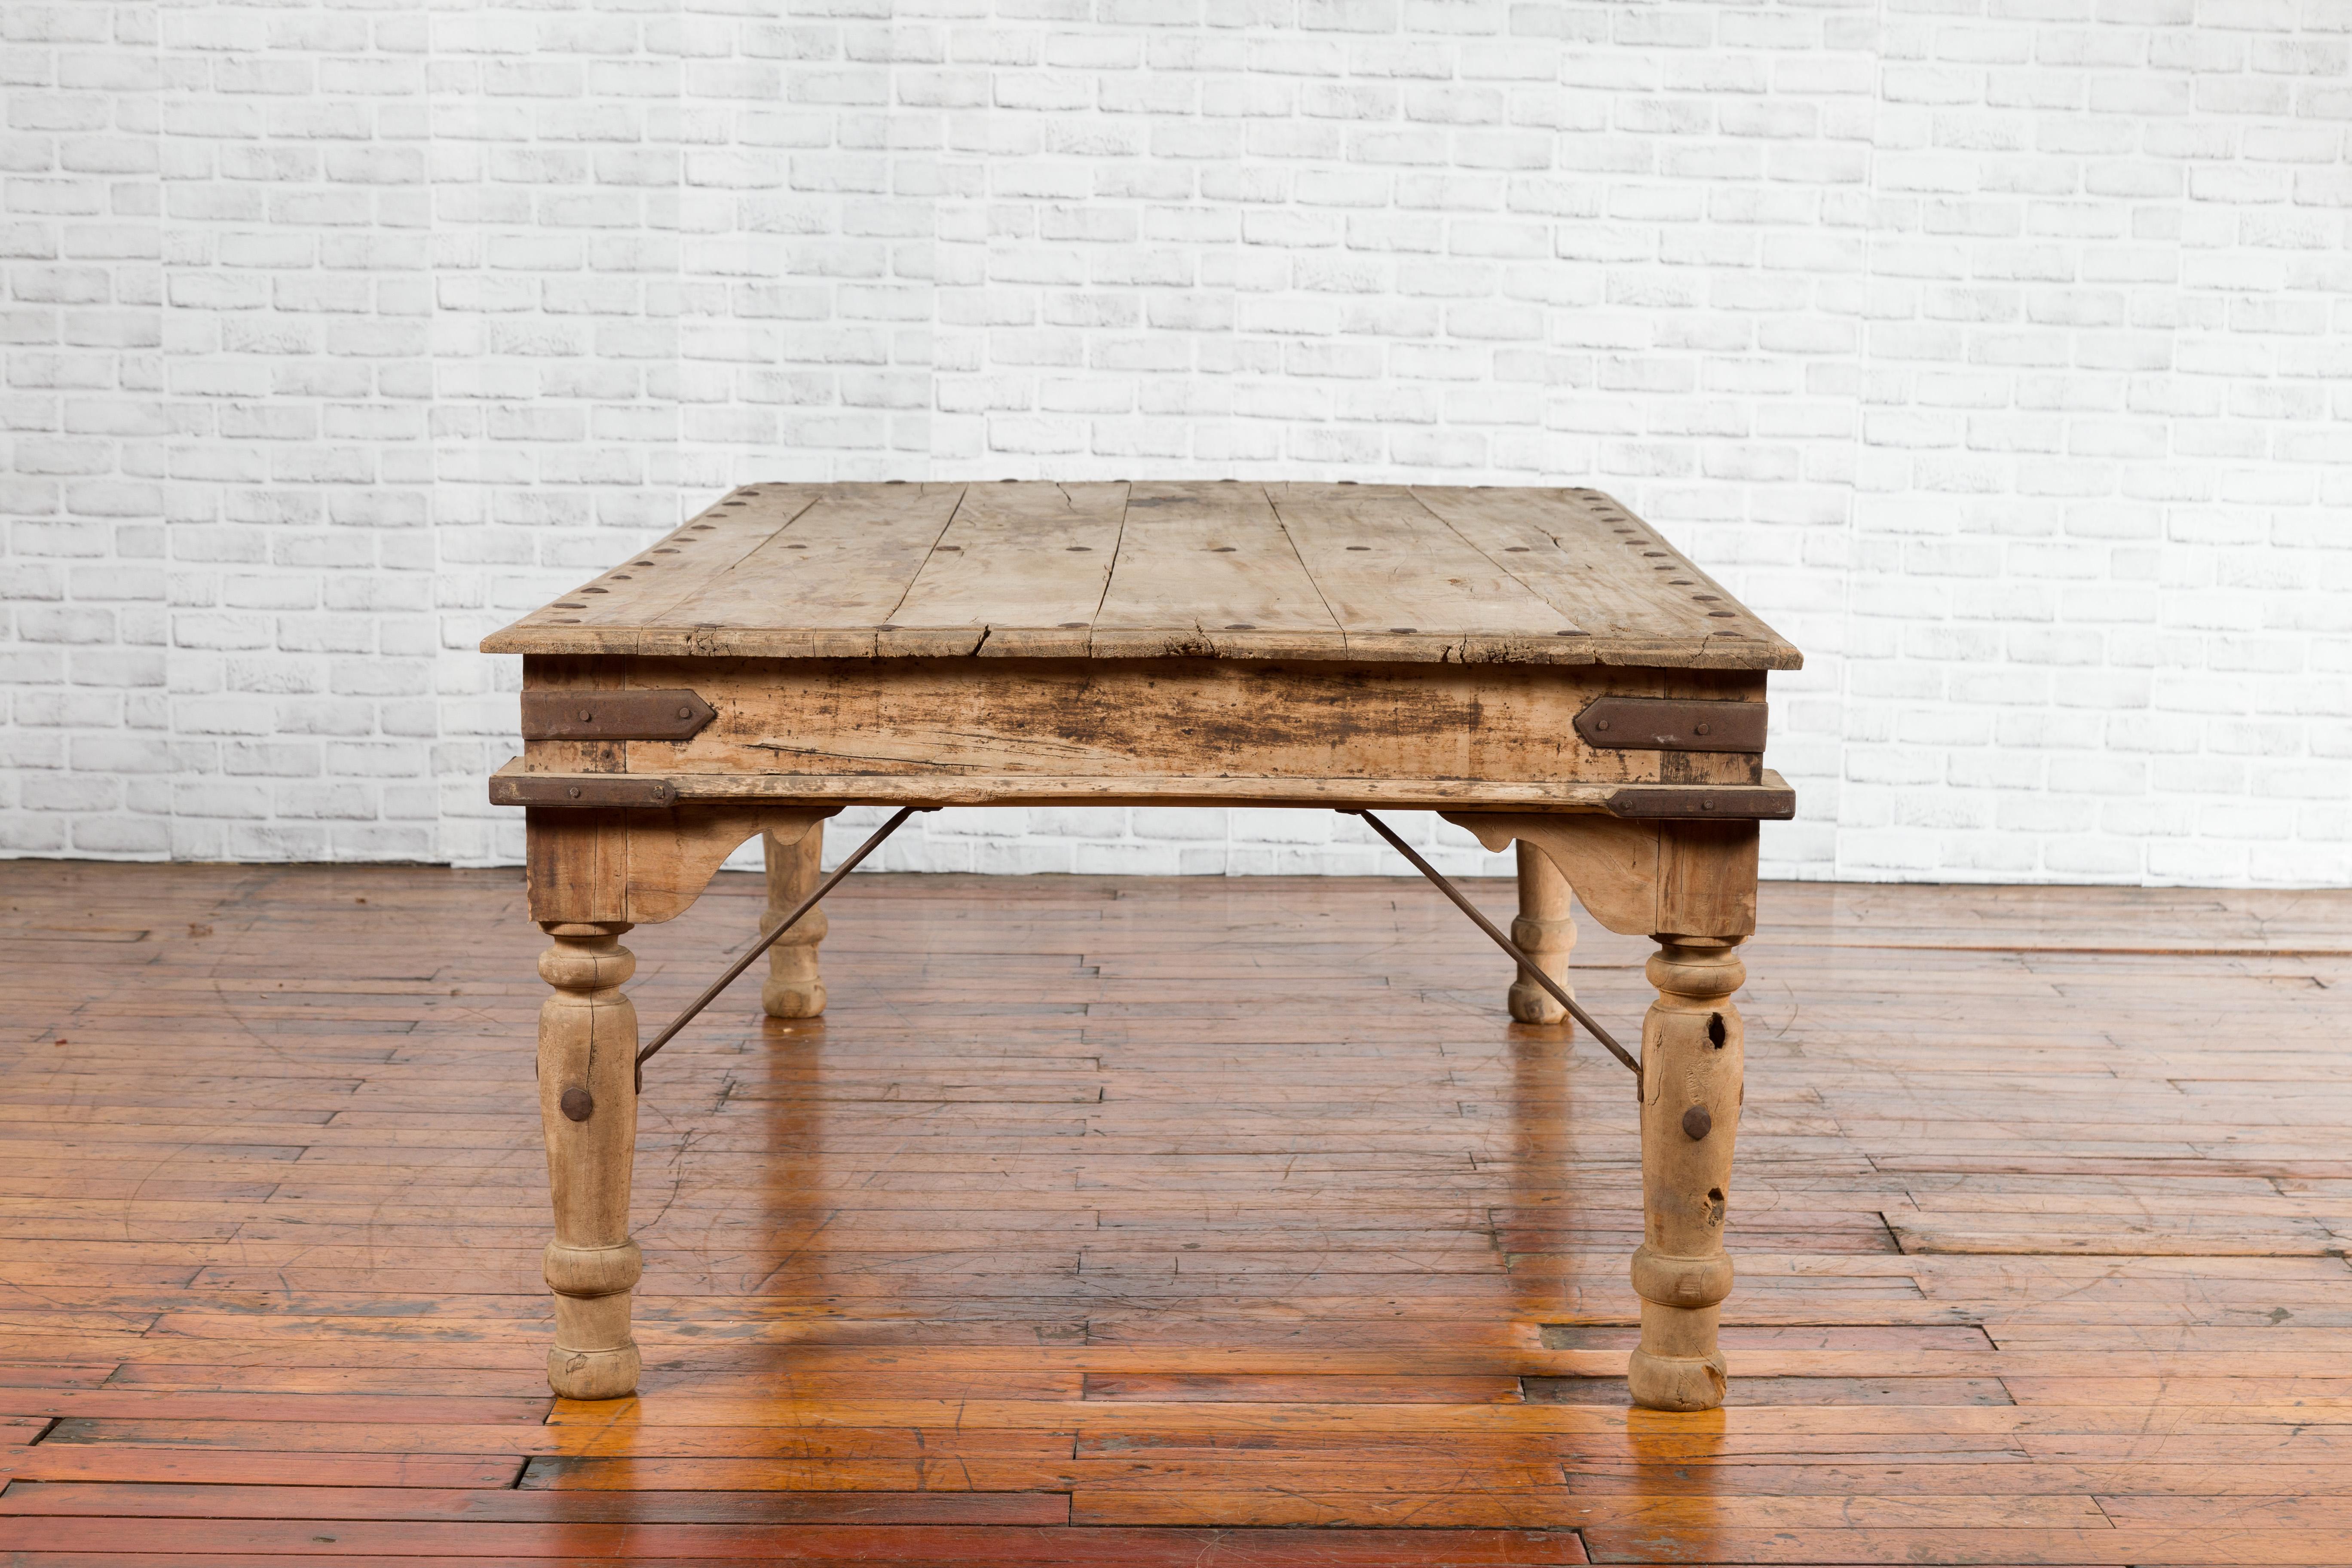 Rustic Indian Low Table with Distressed Patina, Iron Details and Baluster Legs For Sale 8